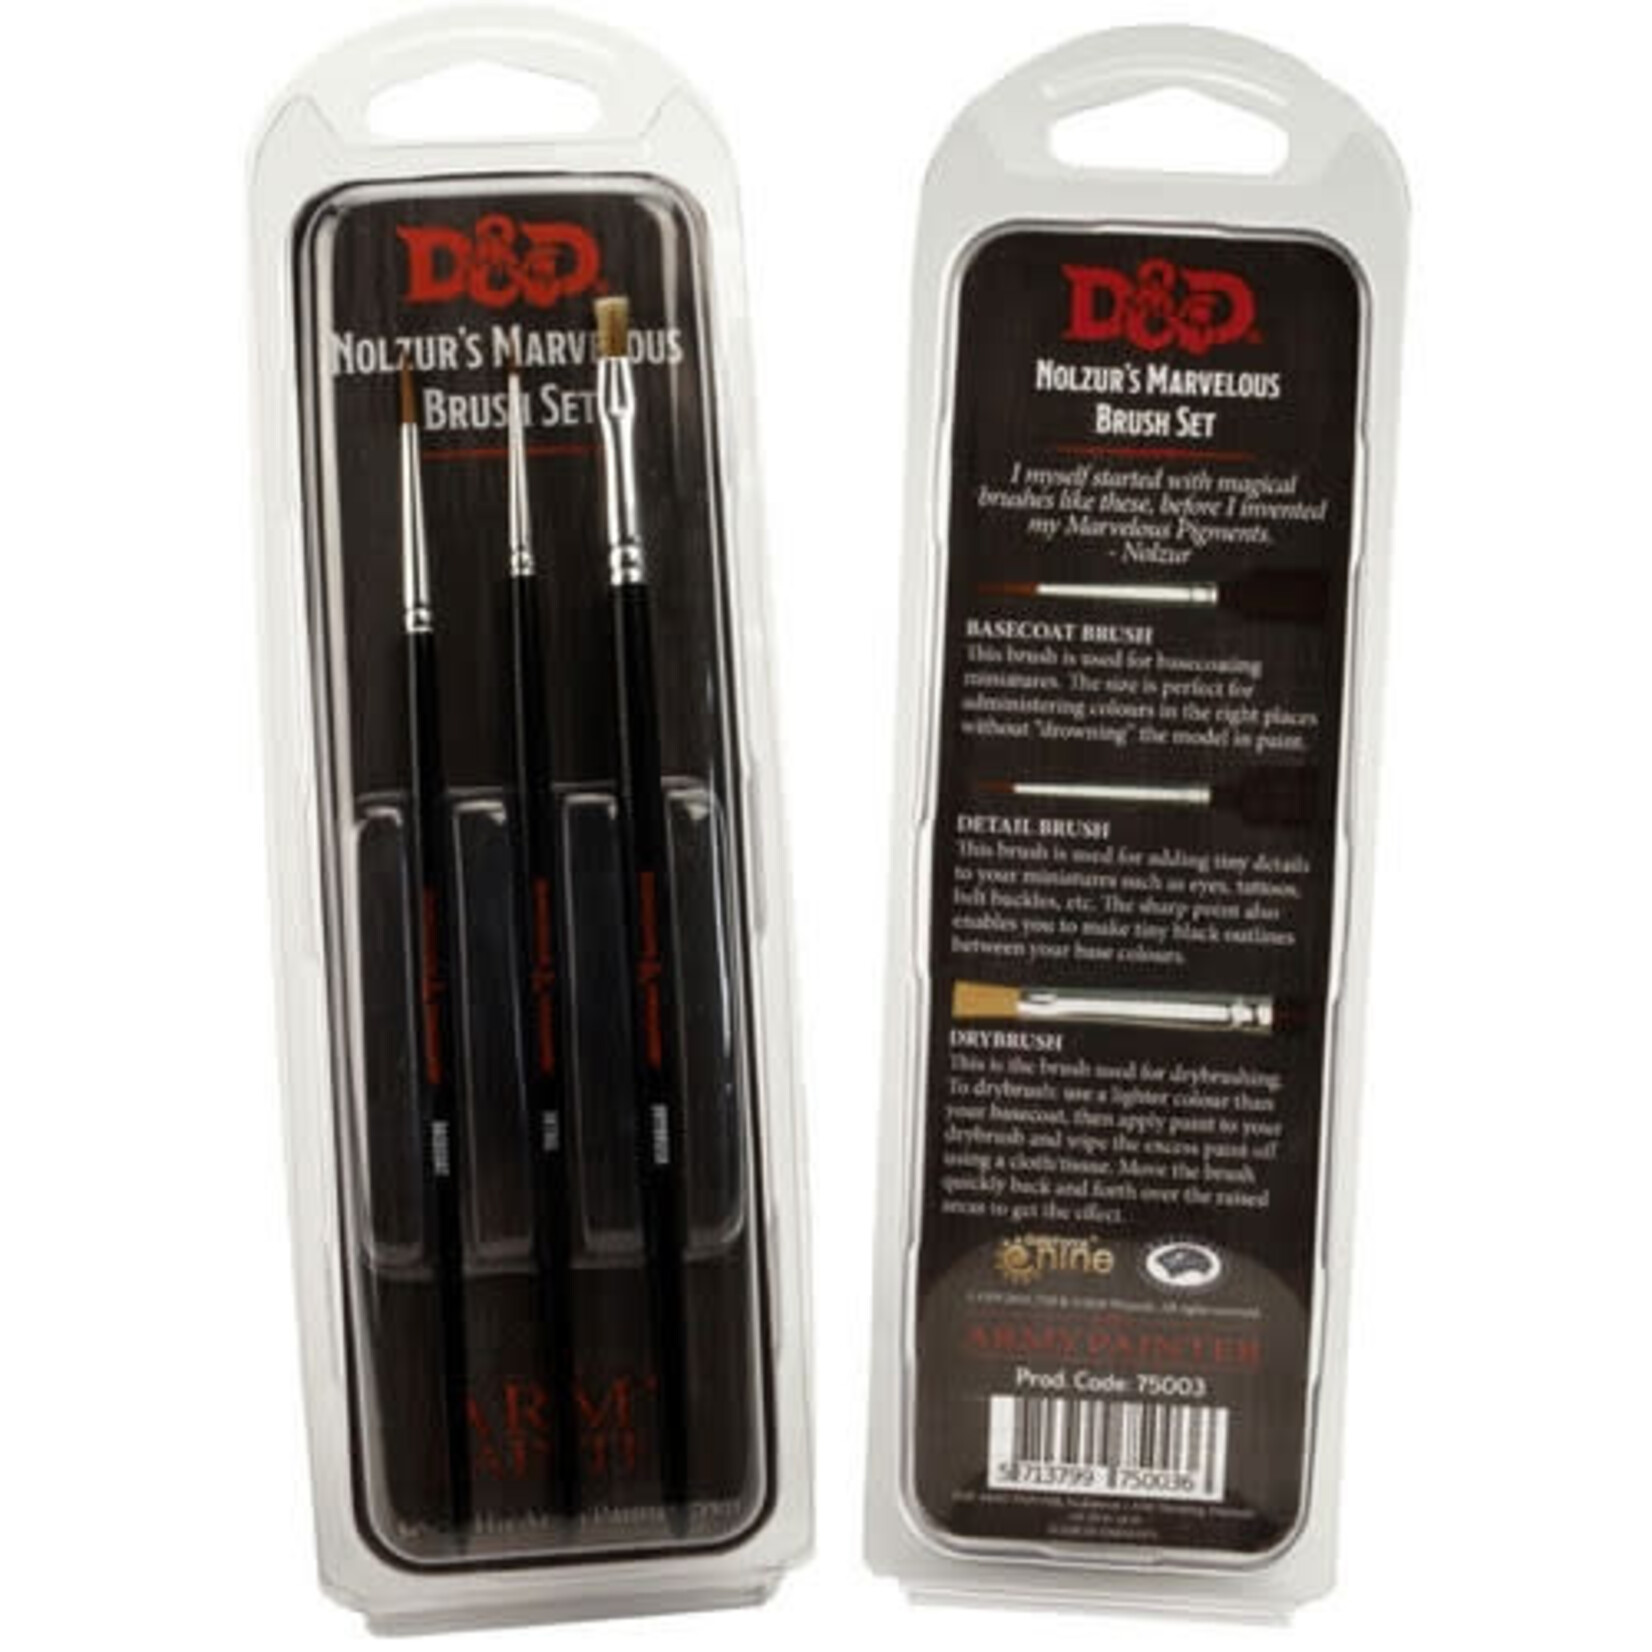 The Army Painter Dungeons & Dragons Nolzur`s Marvelous Brush Set